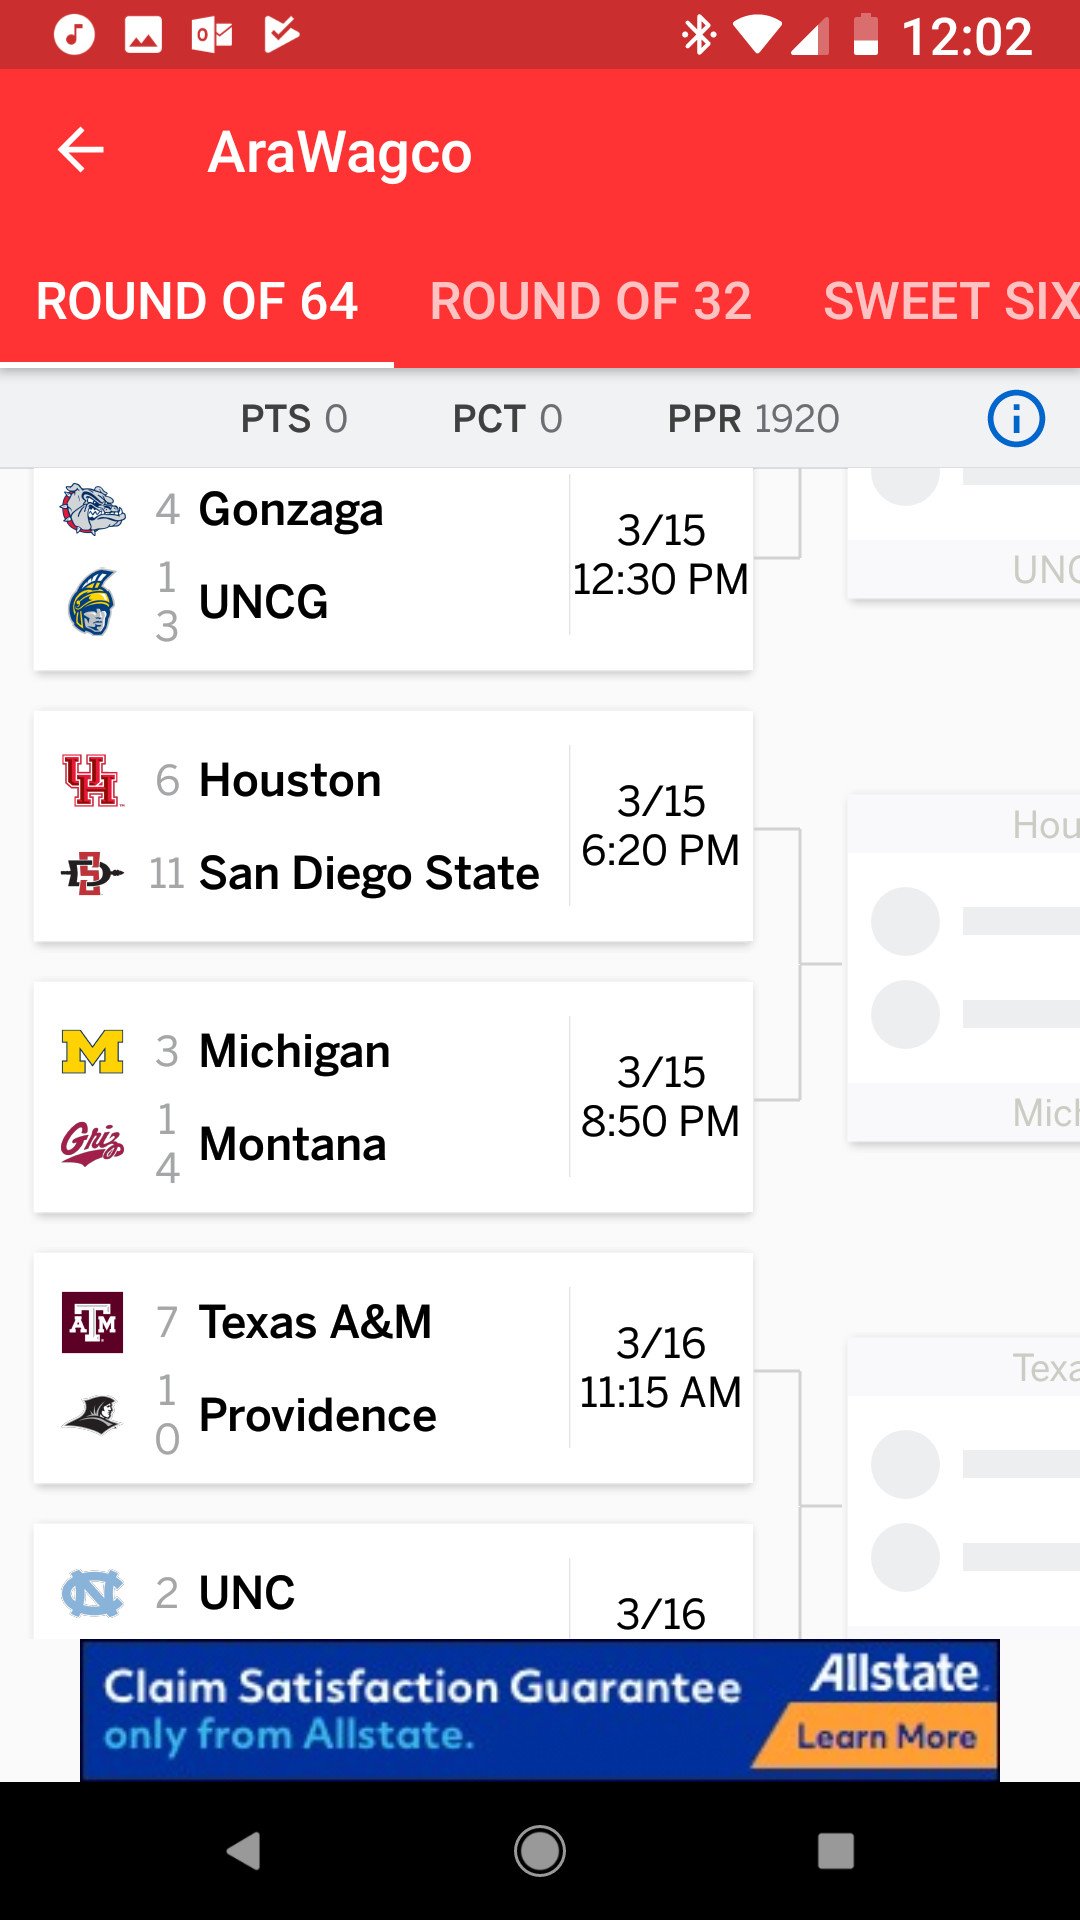 All brackets are perfect right now